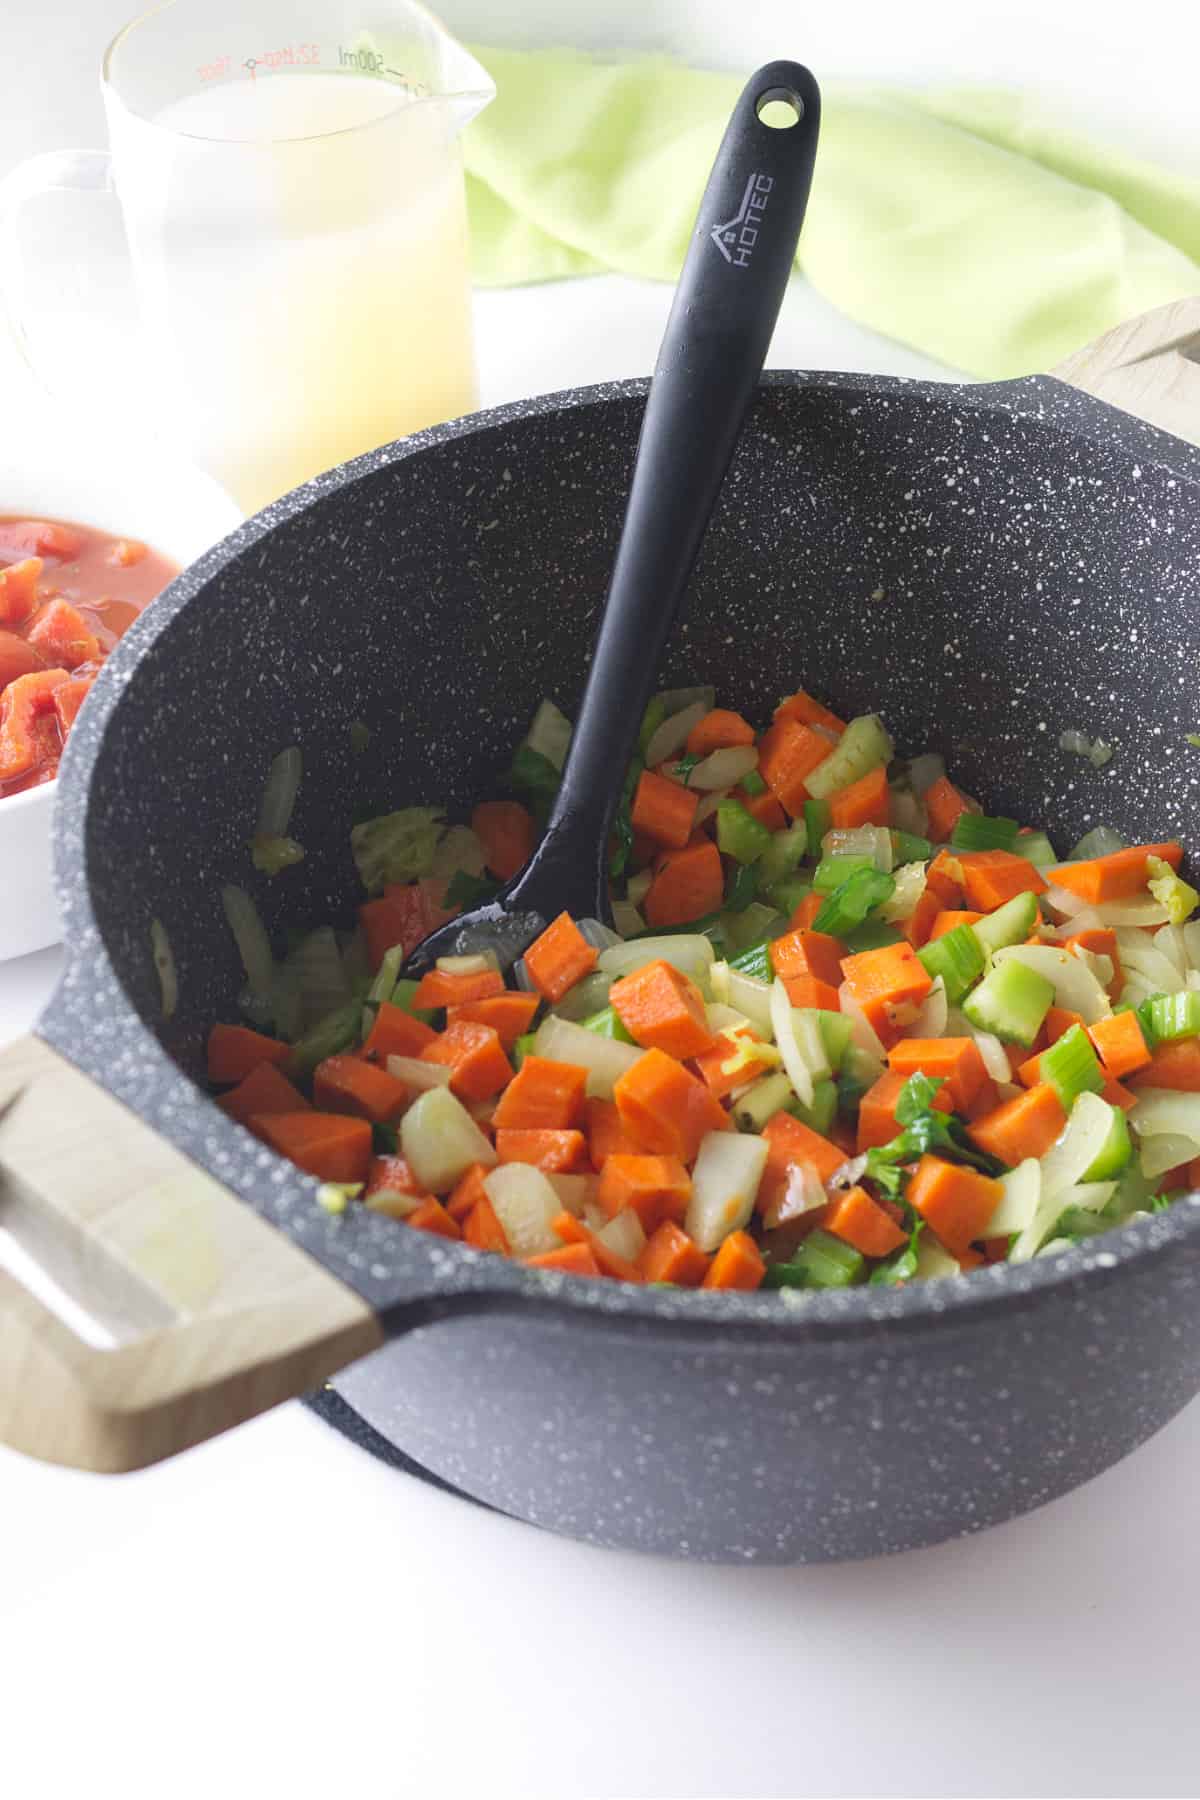 sauteing soup vegetables in a pot.